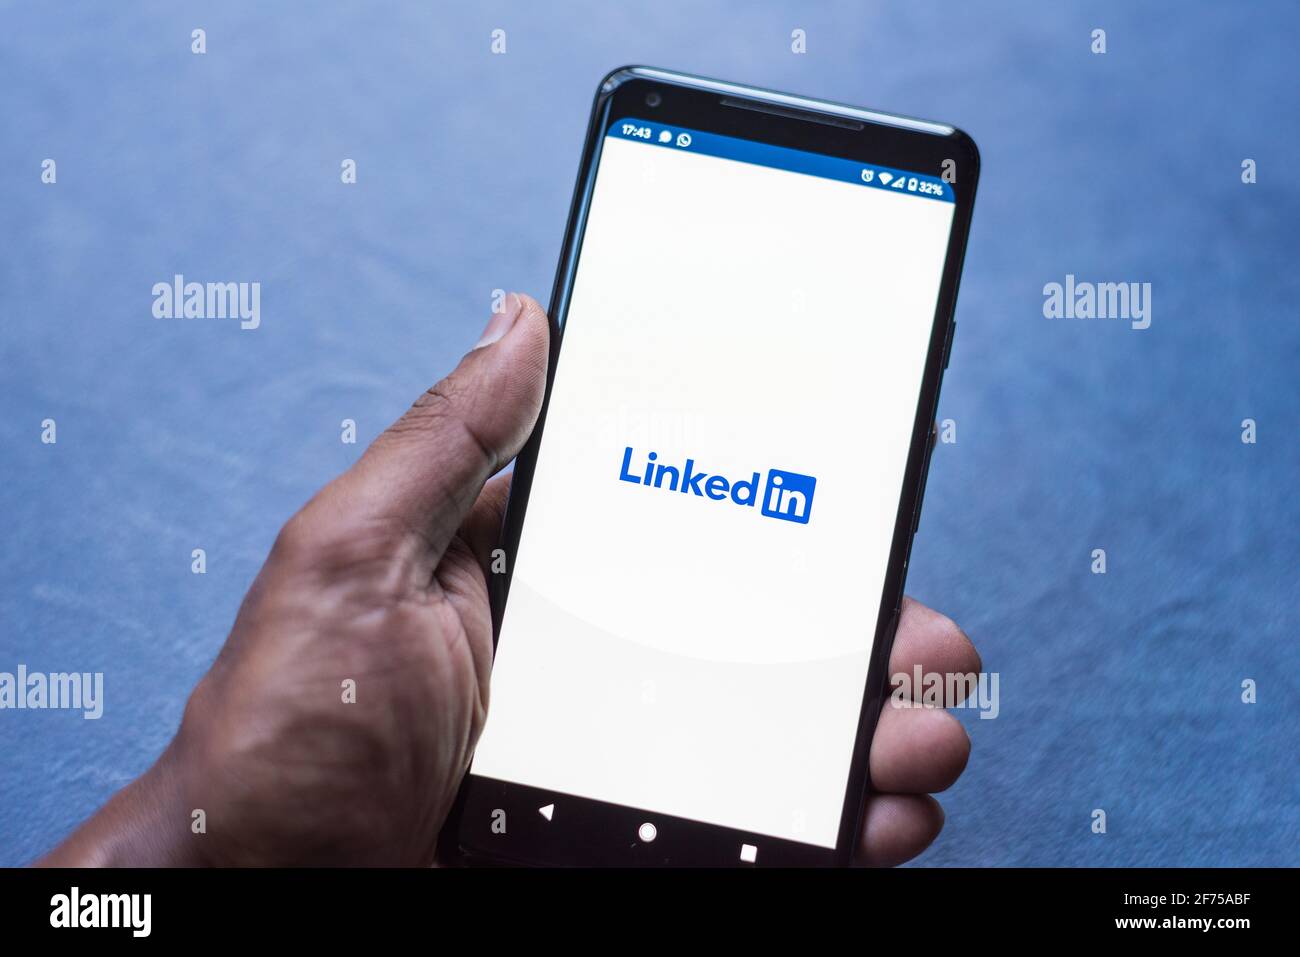 LinkedIn business network app loading on android smartphone Stock Photo